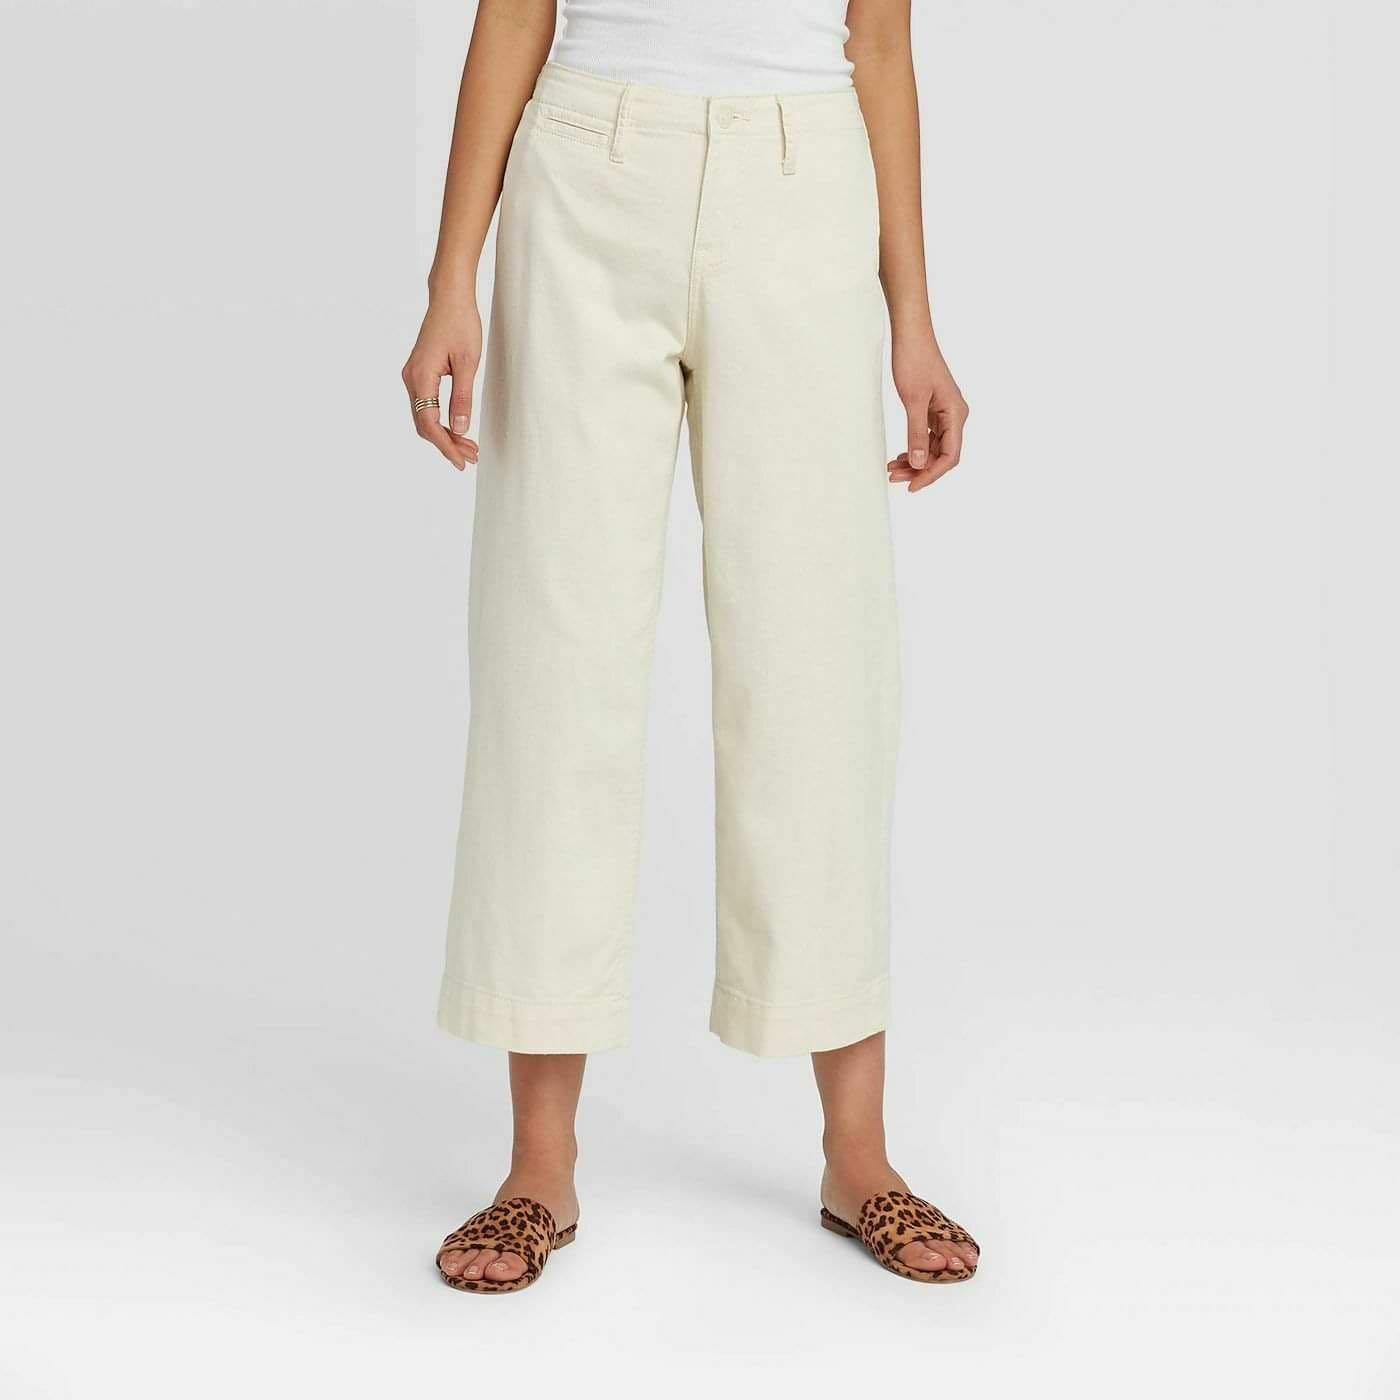 A NEW DAY Women's Trouser High Rise Relaxed Hip & Thigh Cropped Pants (SIZE  12/ CREAM), Women's Fashion, Bottoms, Other Bottoms on Carousell